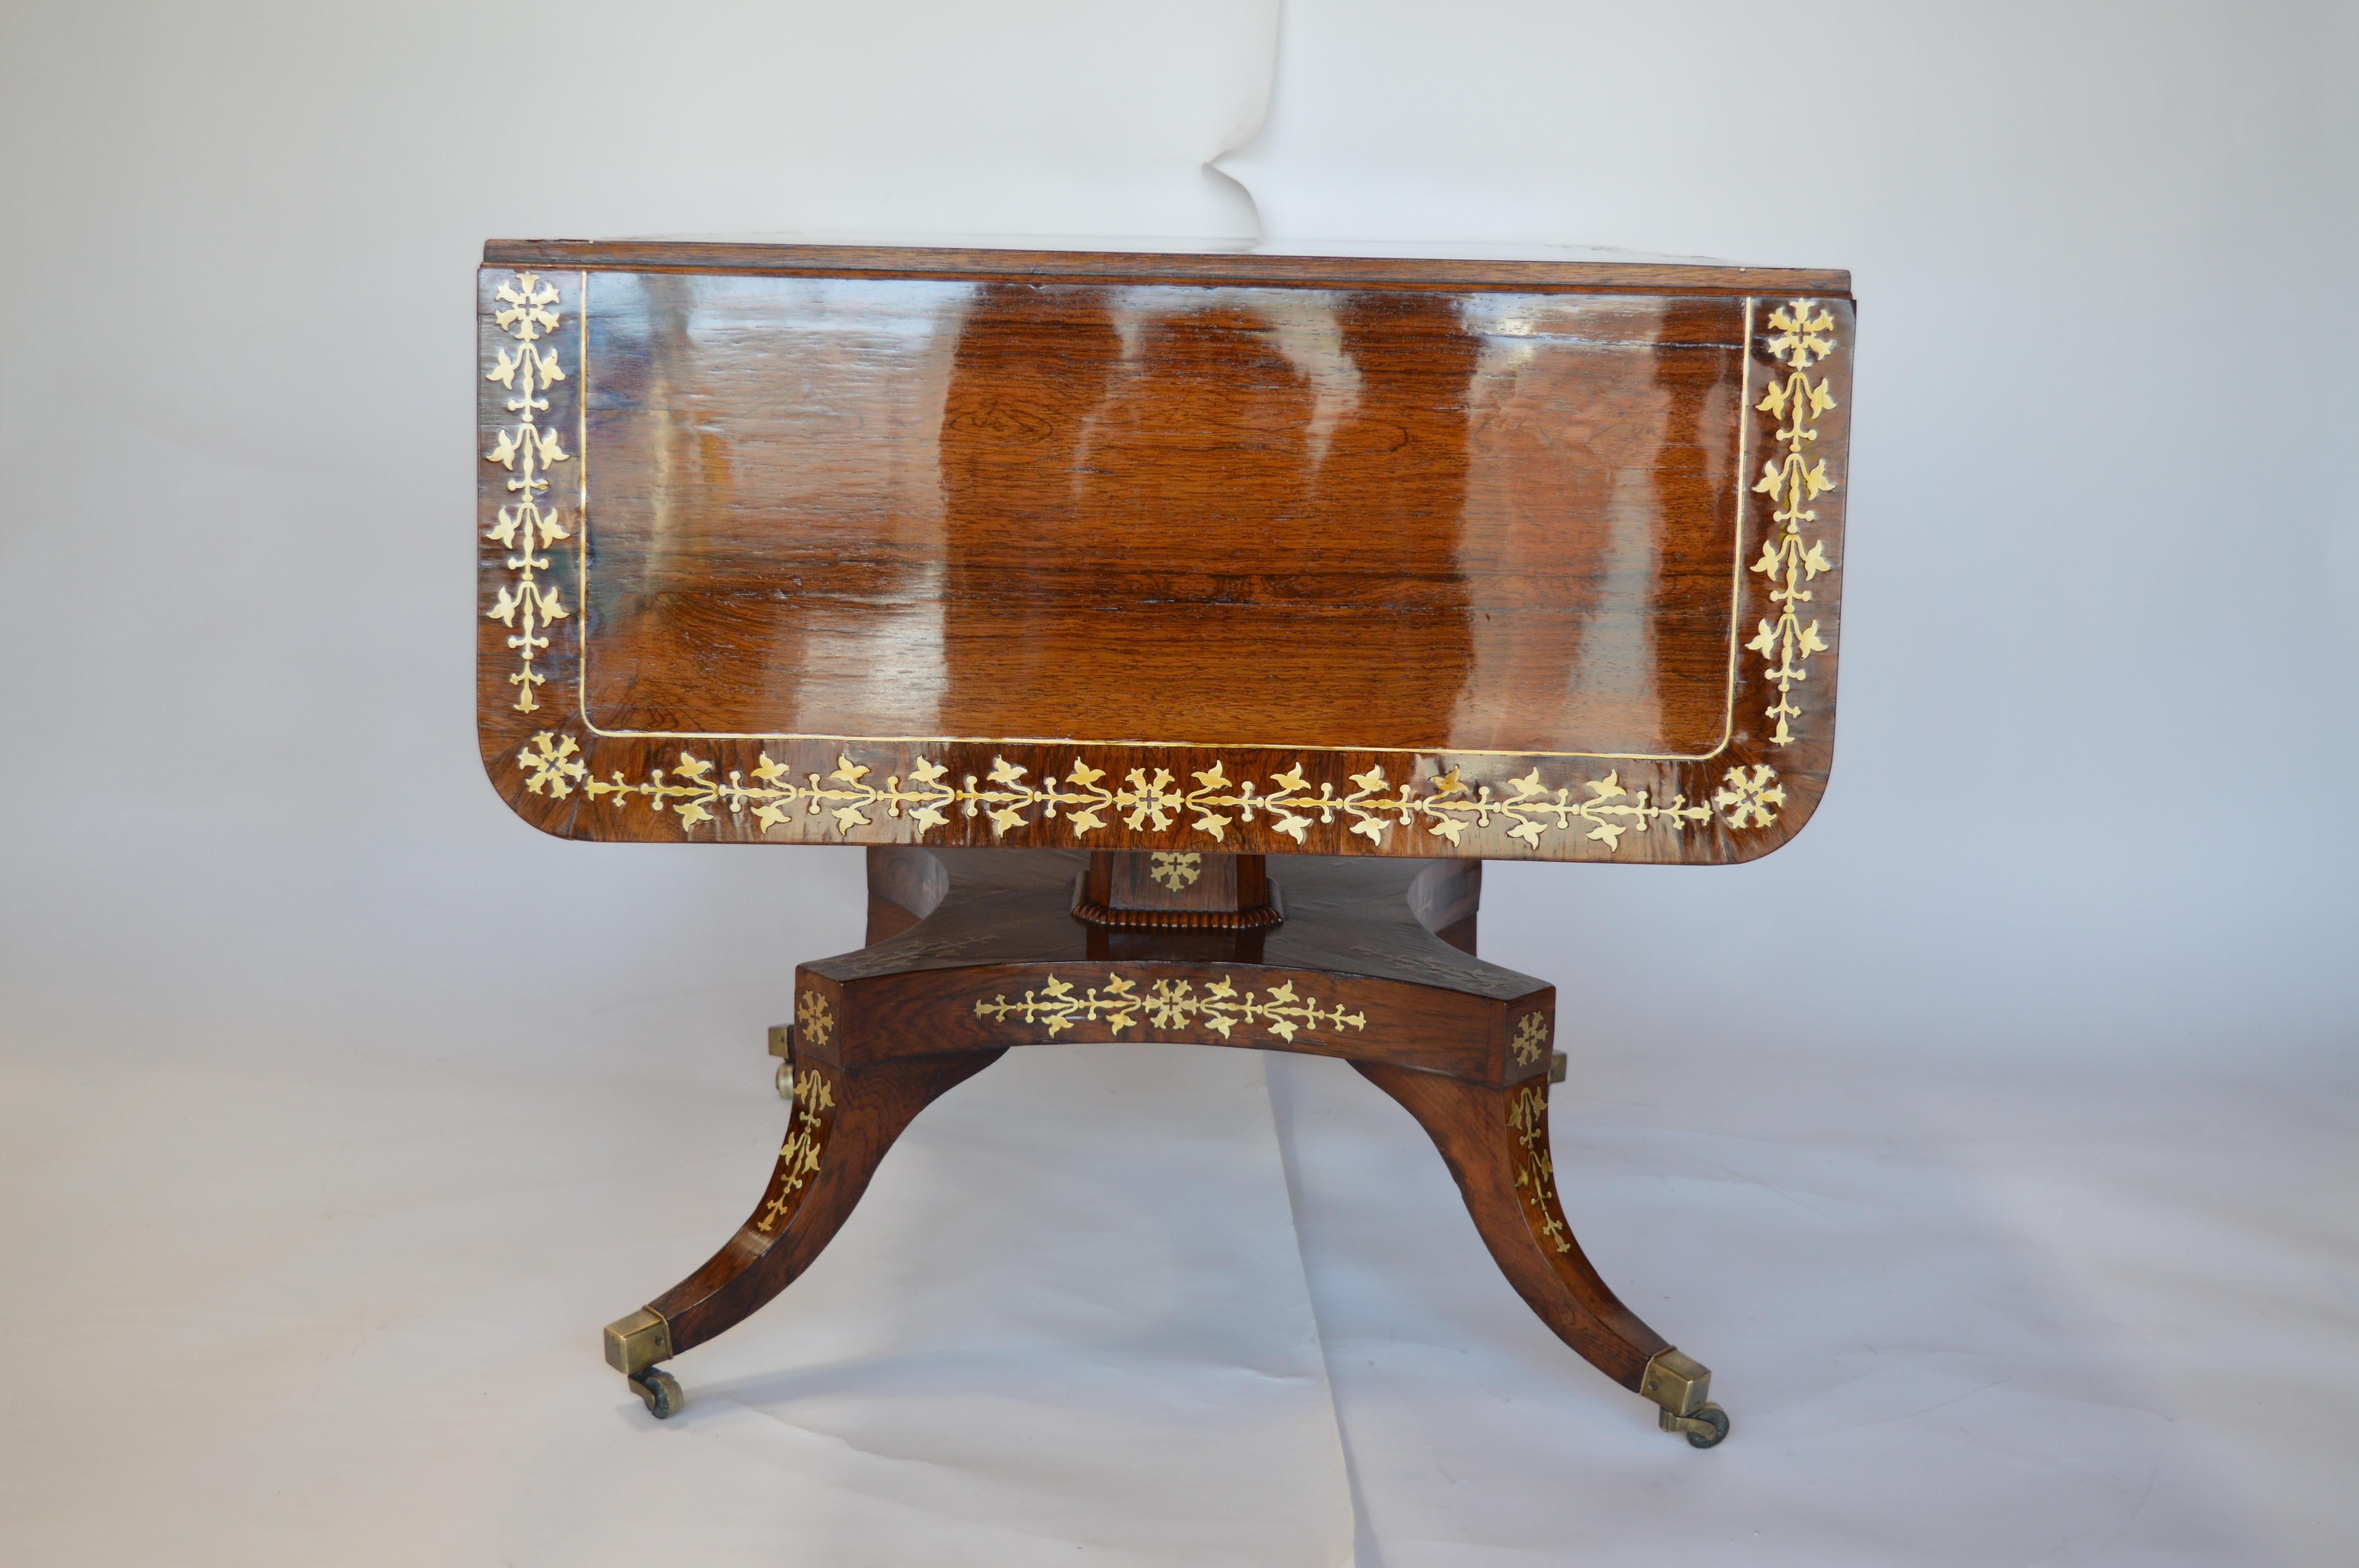 Regency Rosewood Pedestal Table with Brass Inlaid For Sale 5